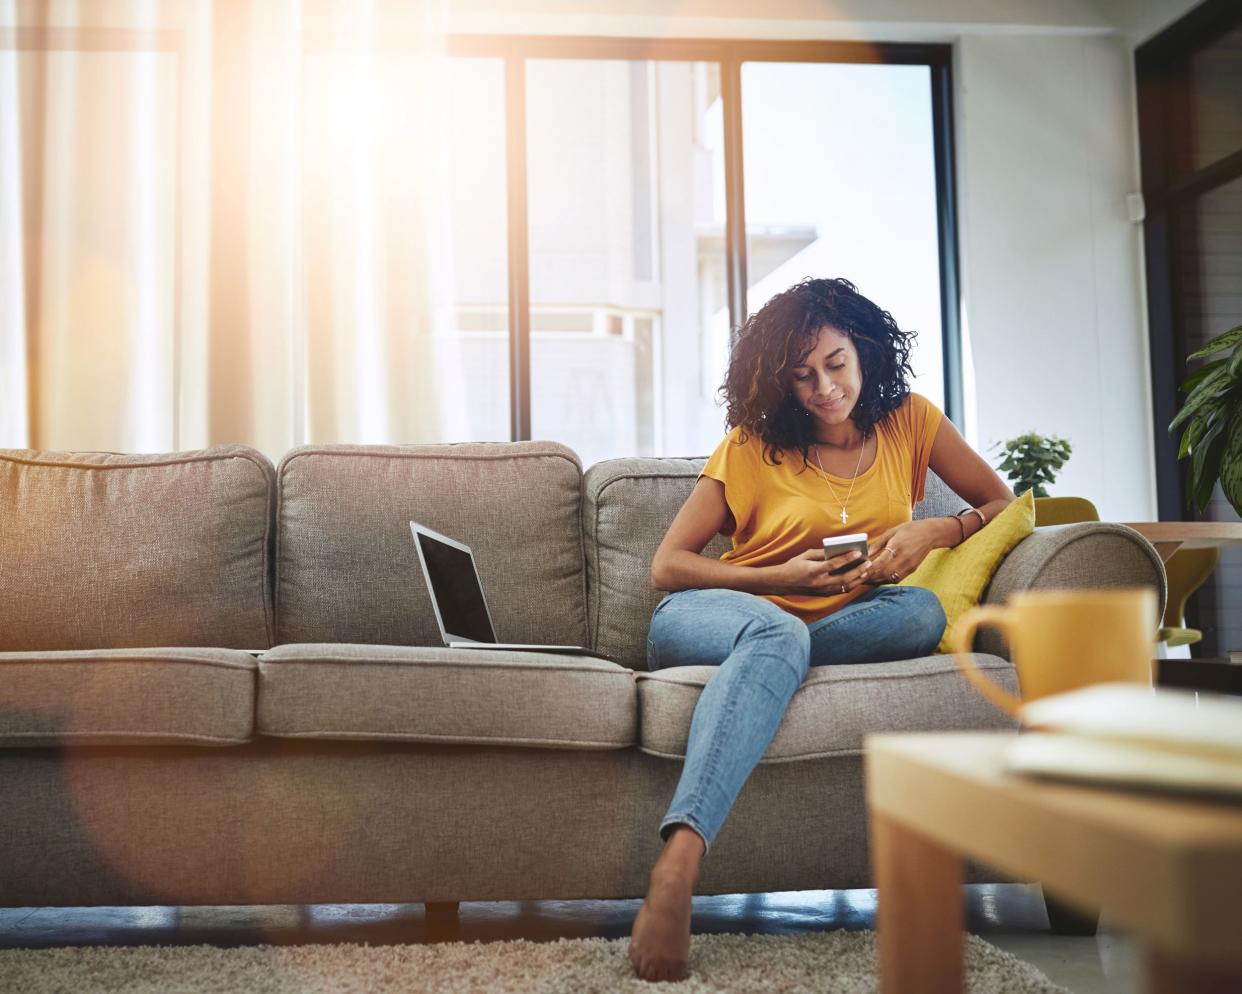 woman house sitting while sitting on couch in living room